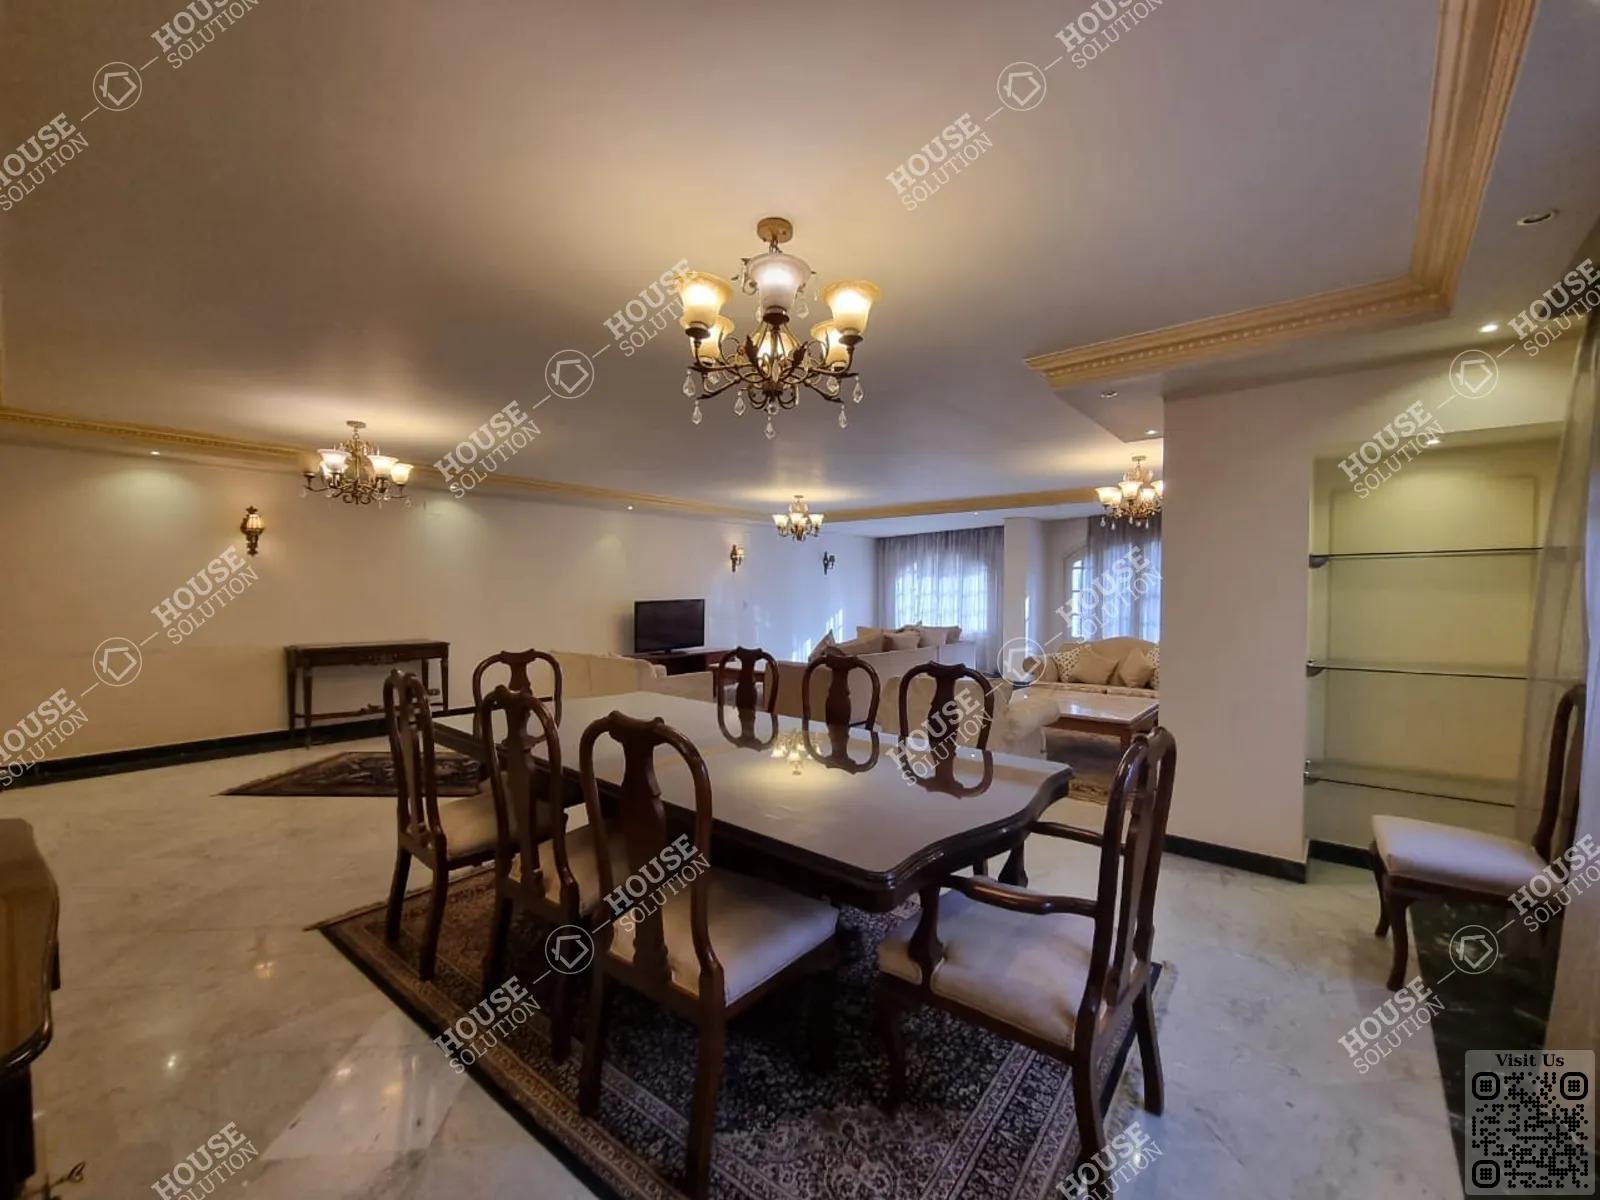 DINING AREA @ Apartments For Rent In Maadi Maadi Sarayat Area: 350 m² consists of 4 Bedrooms 3 Bathrooms Modern furnished 5 stars #5423-2